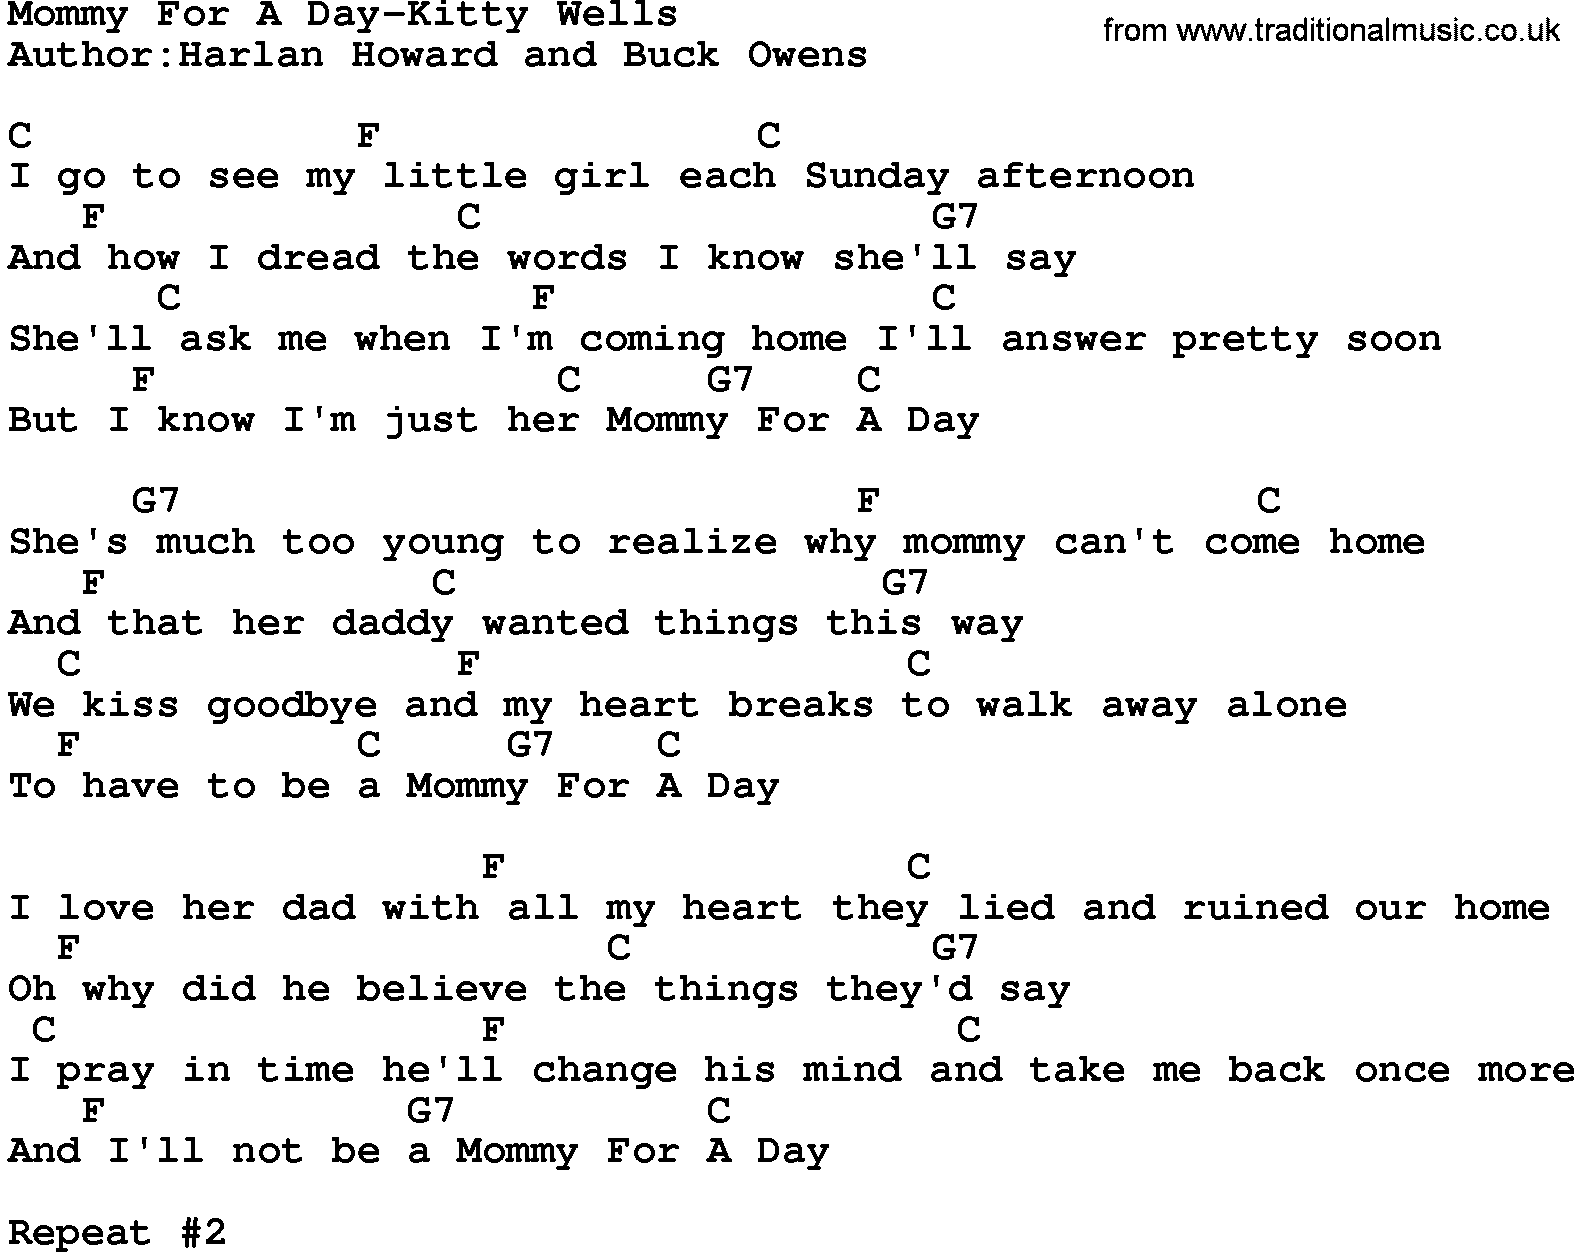 Country music song: Mommy For A Day-Kitty Wells lyrics and chords